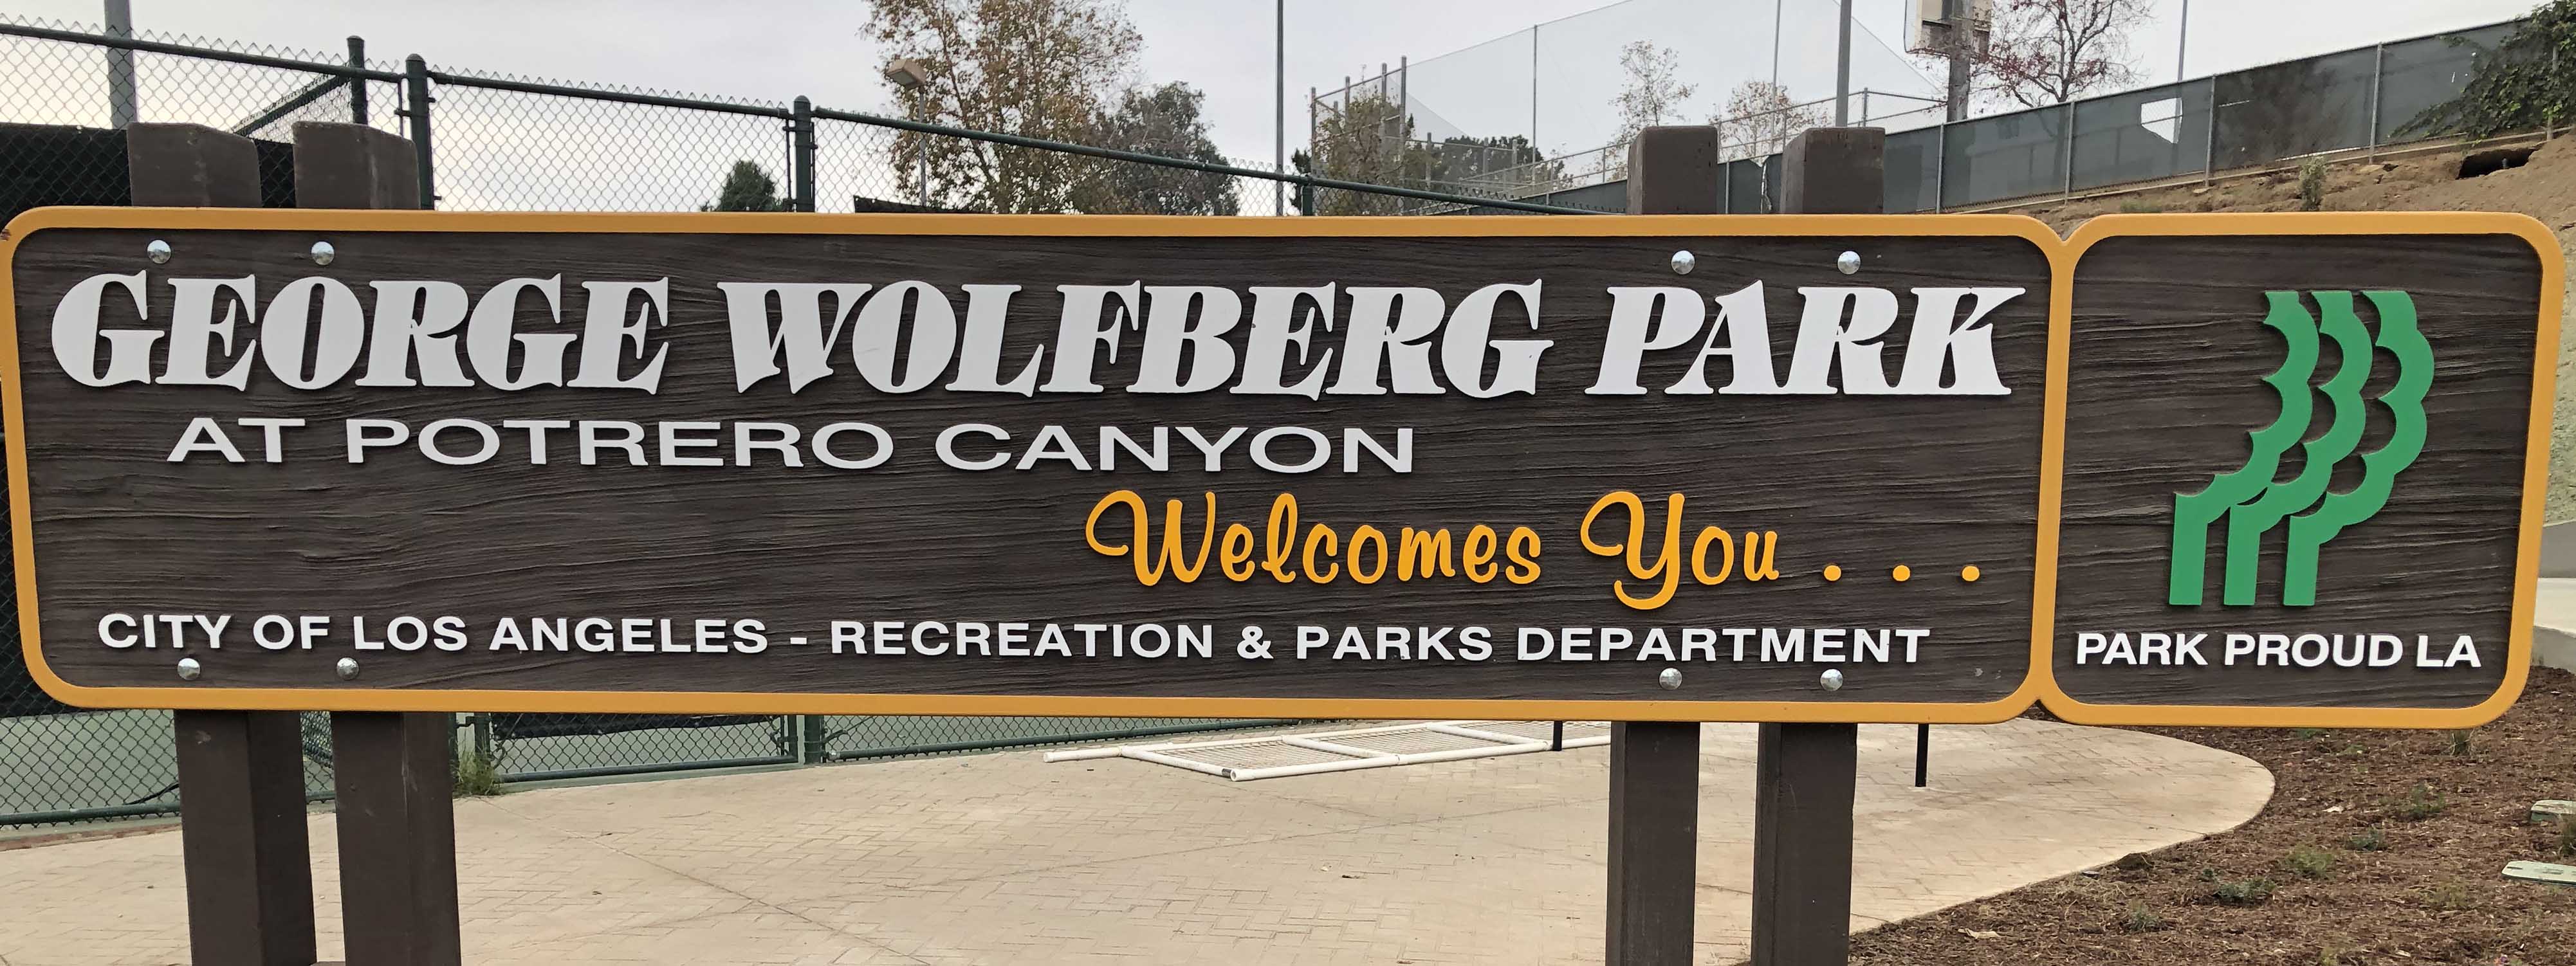 George Wolfberg Park at Potrero Canyon grand opening event, at former Potrero Canyon Park